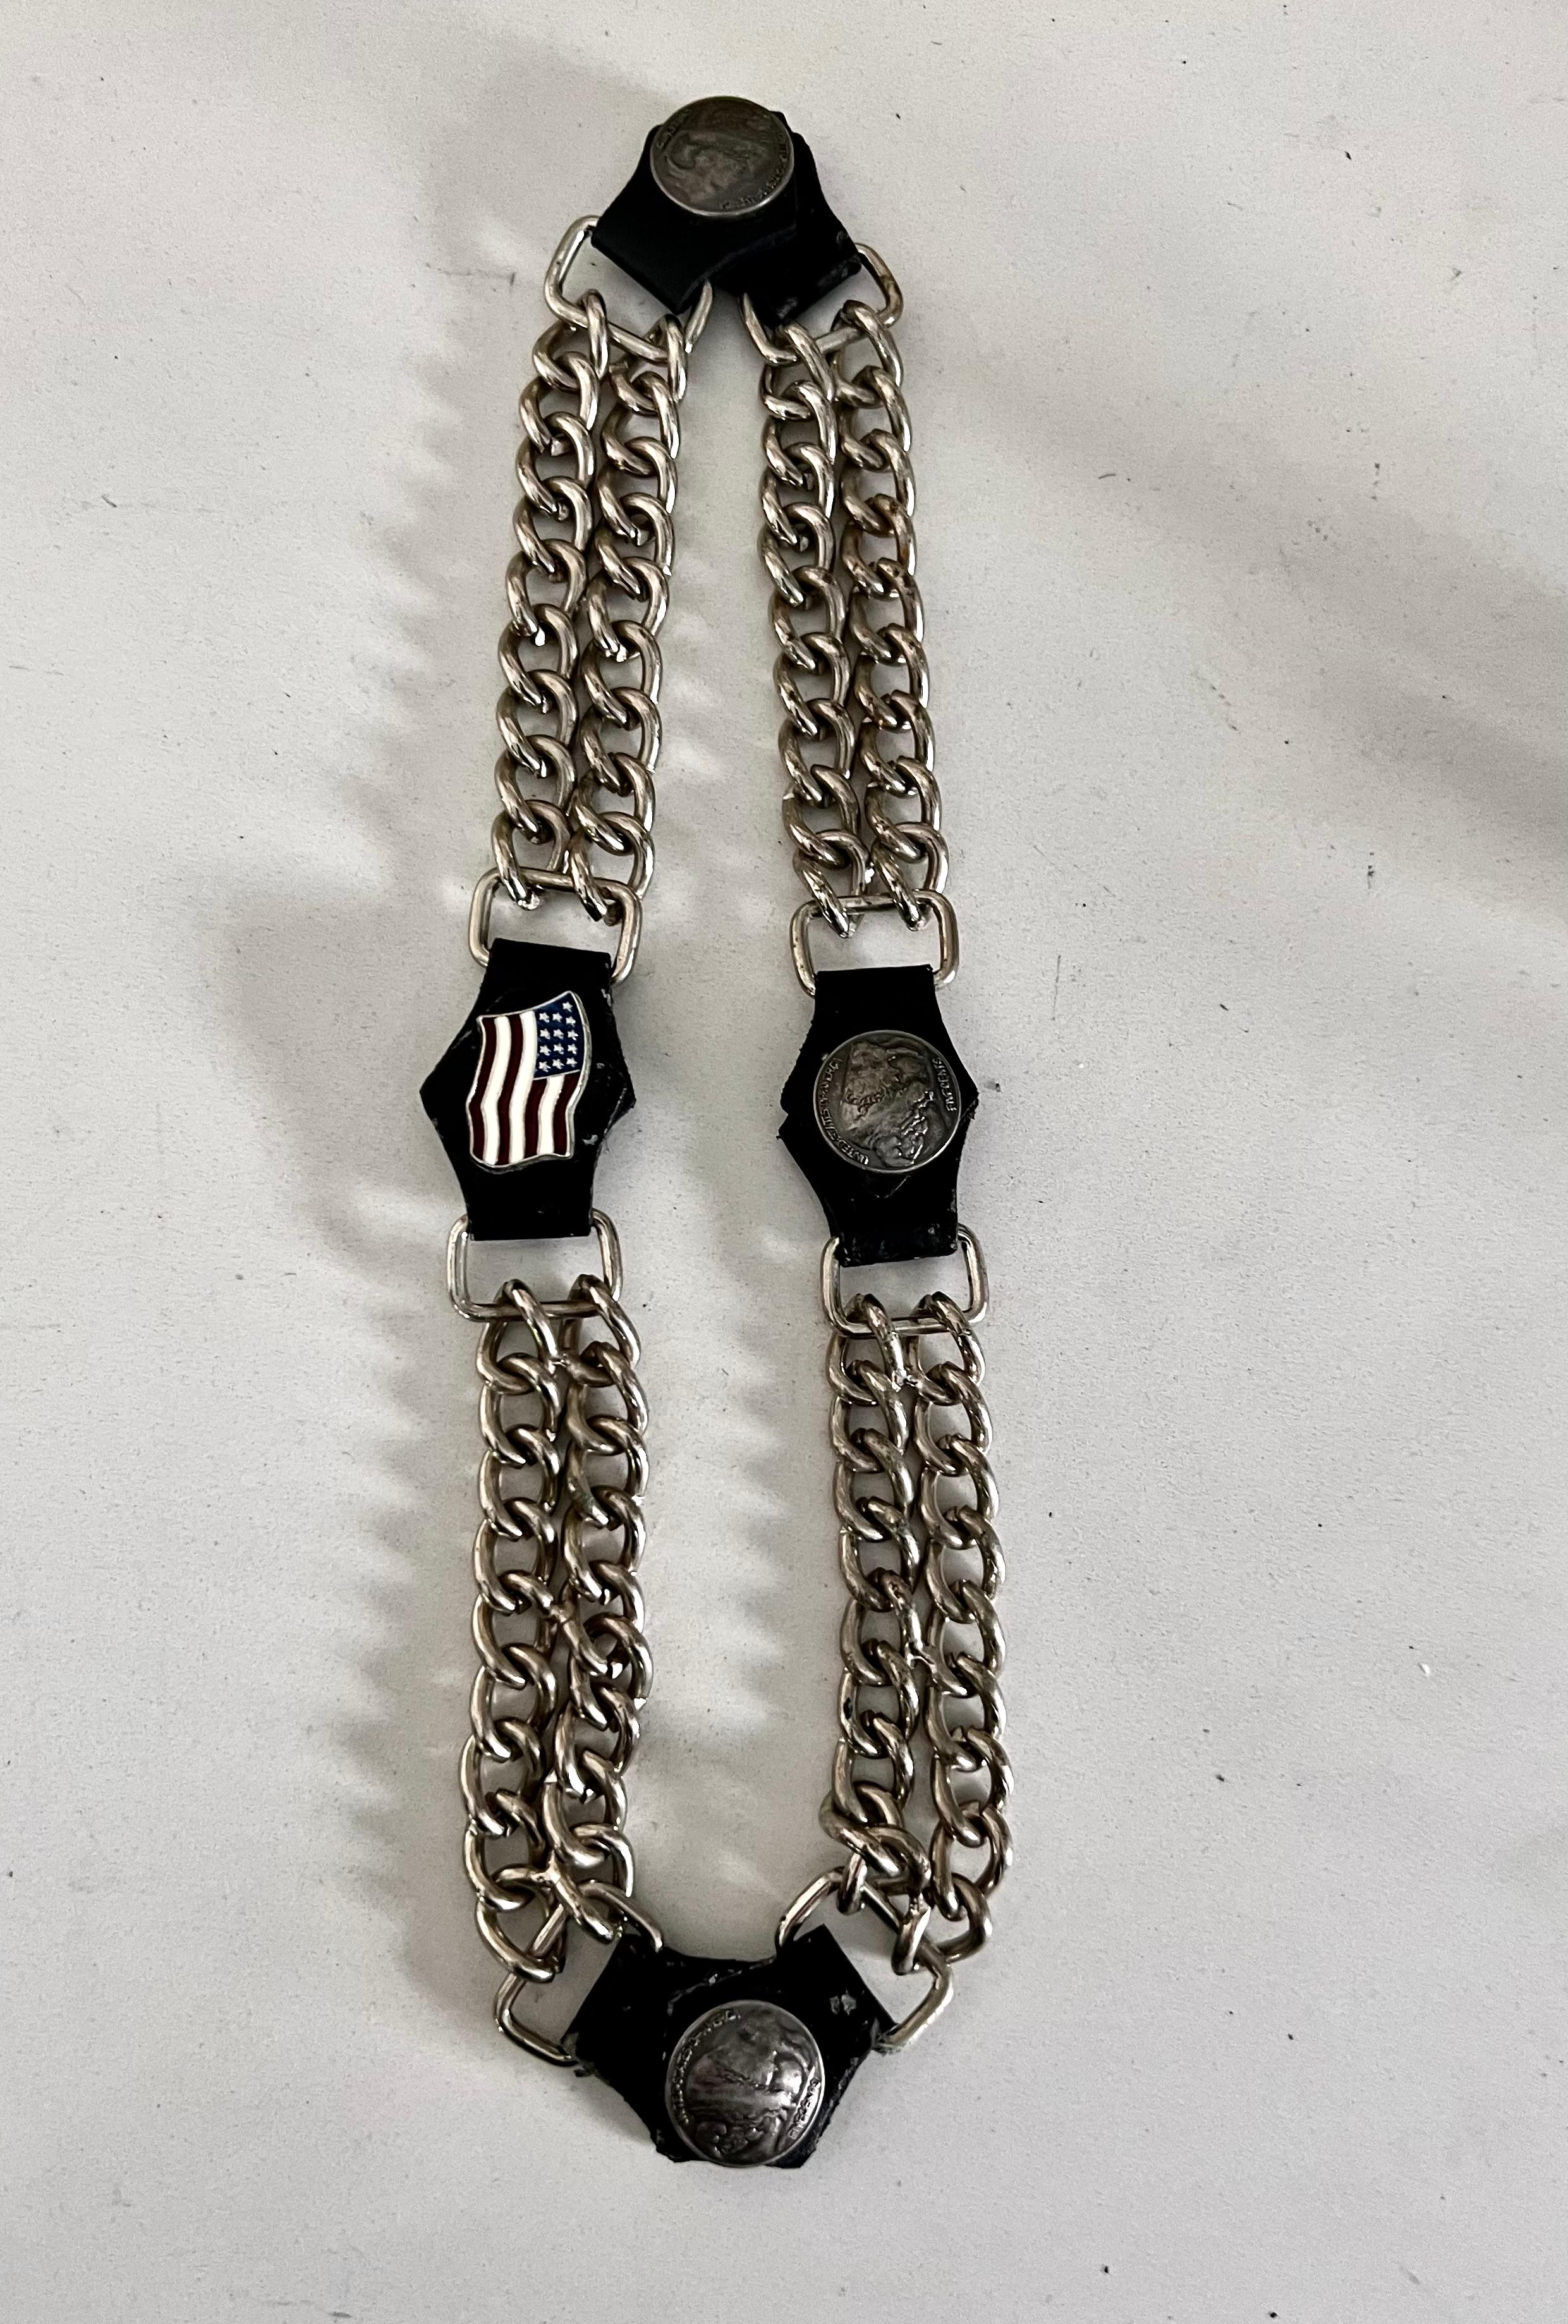 A substantial statement piece for pets or humans. Likely a relic of American biker culture. 

Metal and leather dog collar with buffalo nickels and a 13-star U.S. flag detail. Collar measures 24 inches total length, a series of 4 inch adjustable